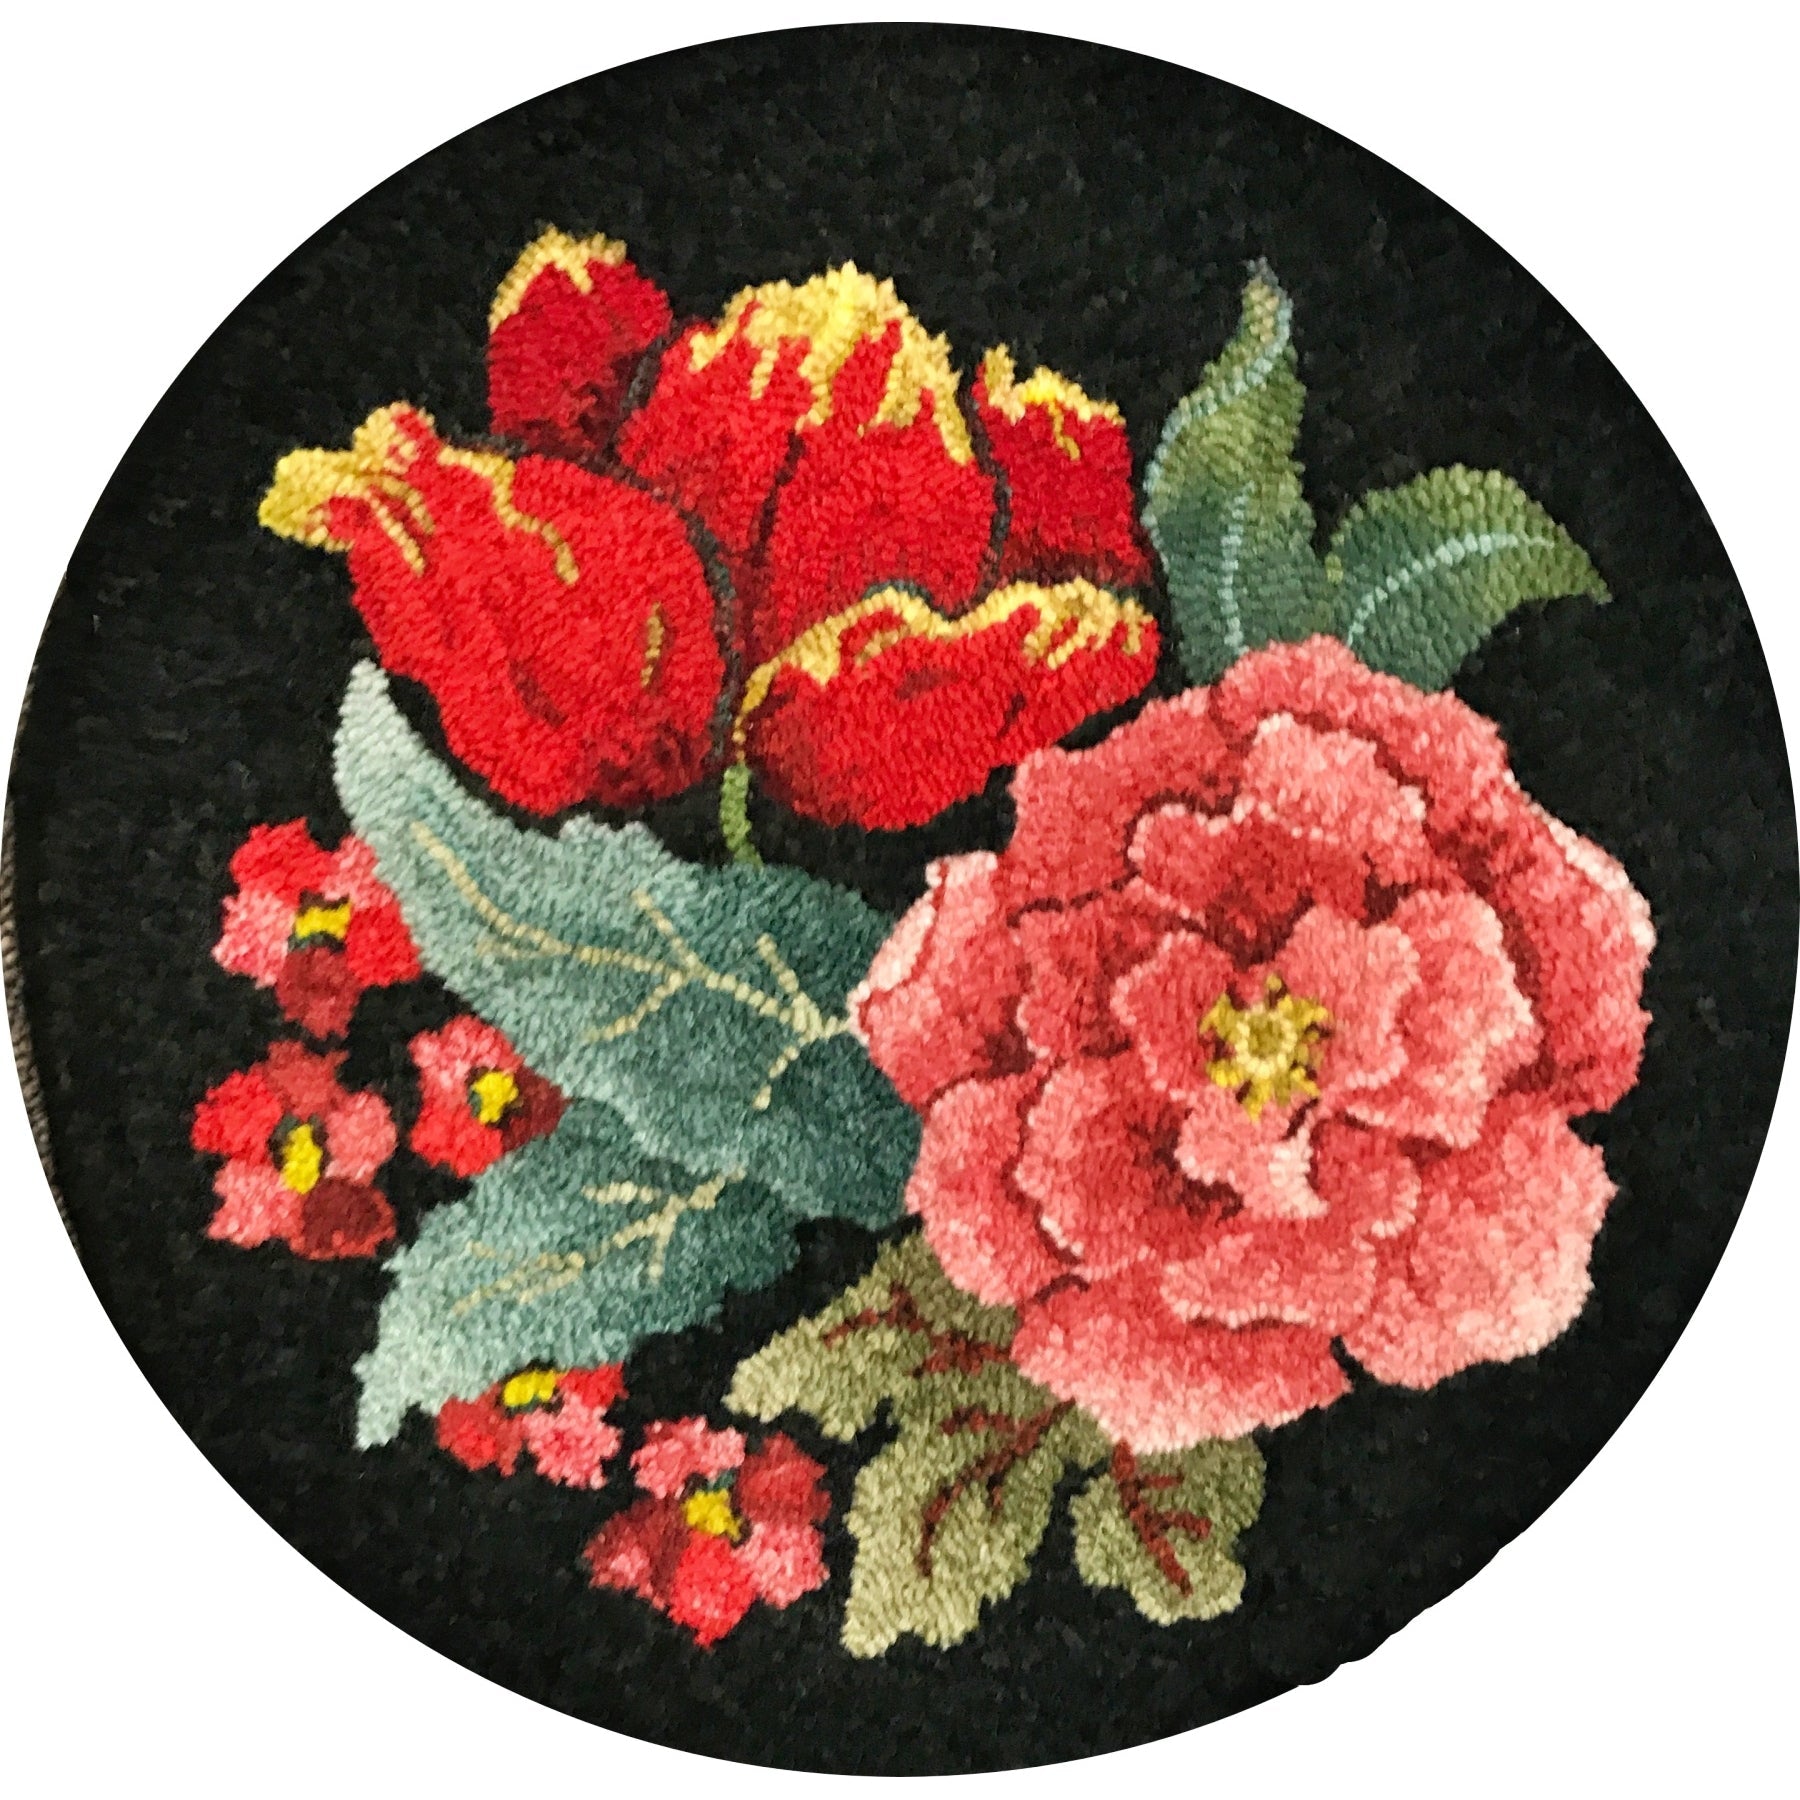 Floral Potpouri, rug hooked by Libby Reid